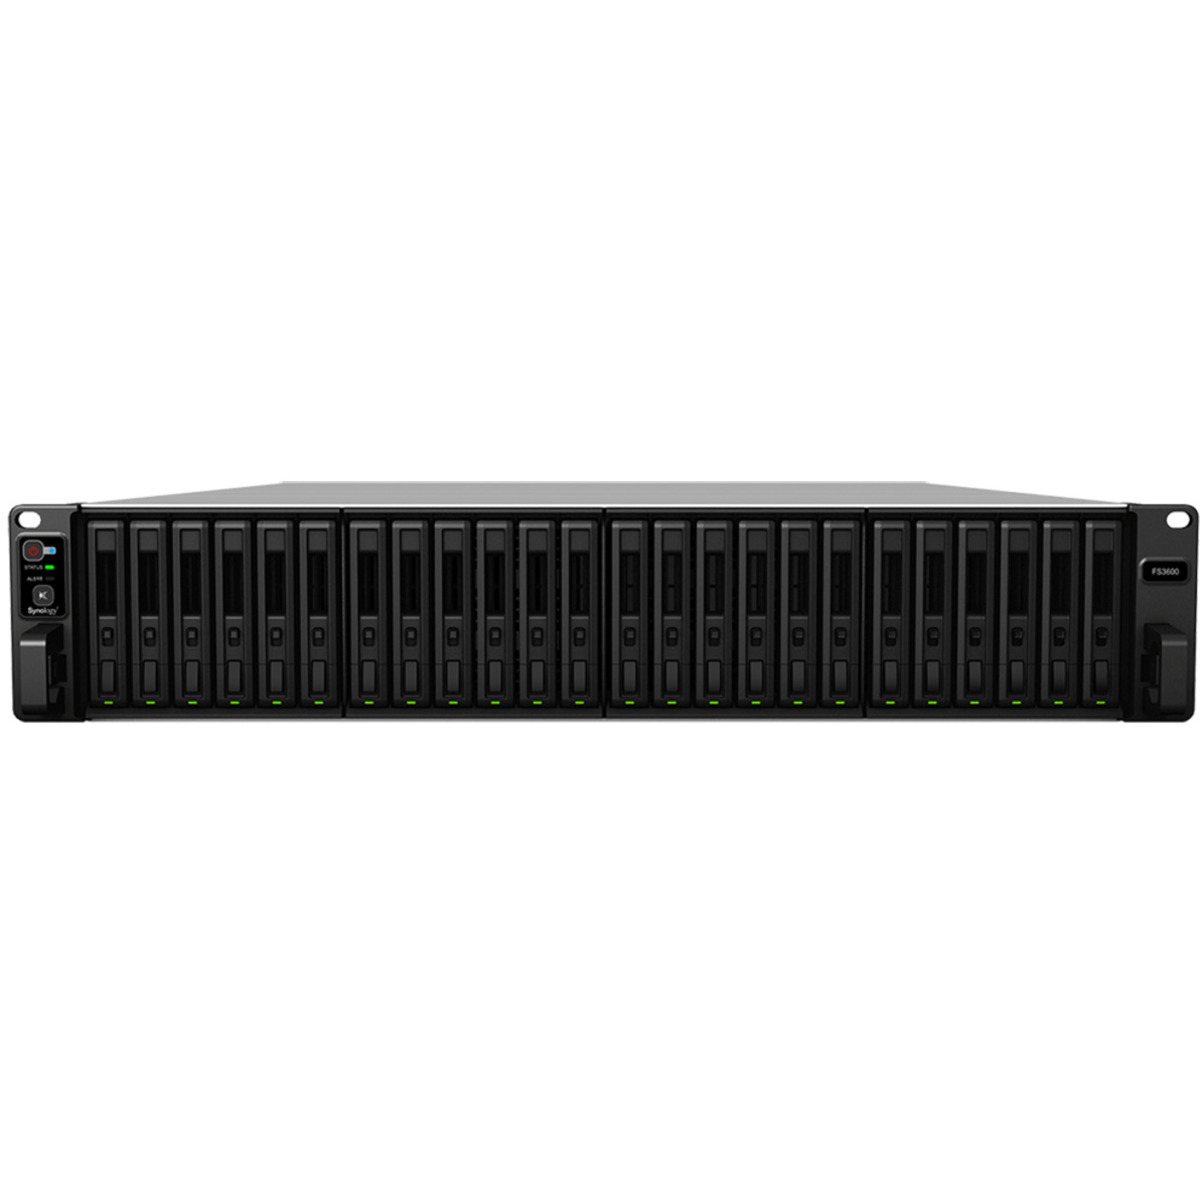 Synology FlashStation FS3600 40tb 24-Bay RackMount Large Business / Enterprise NAS - Network Attached Storage Device 20x2tb Samsung 870 EVO MZ-77E2T0BAM 2.5 560/530MB/s SATA 6Gb/s SSD CONSUMER Class Drives Installed - Burn-In Tested - FREE RAM UPGRADE FlashStation FS3600